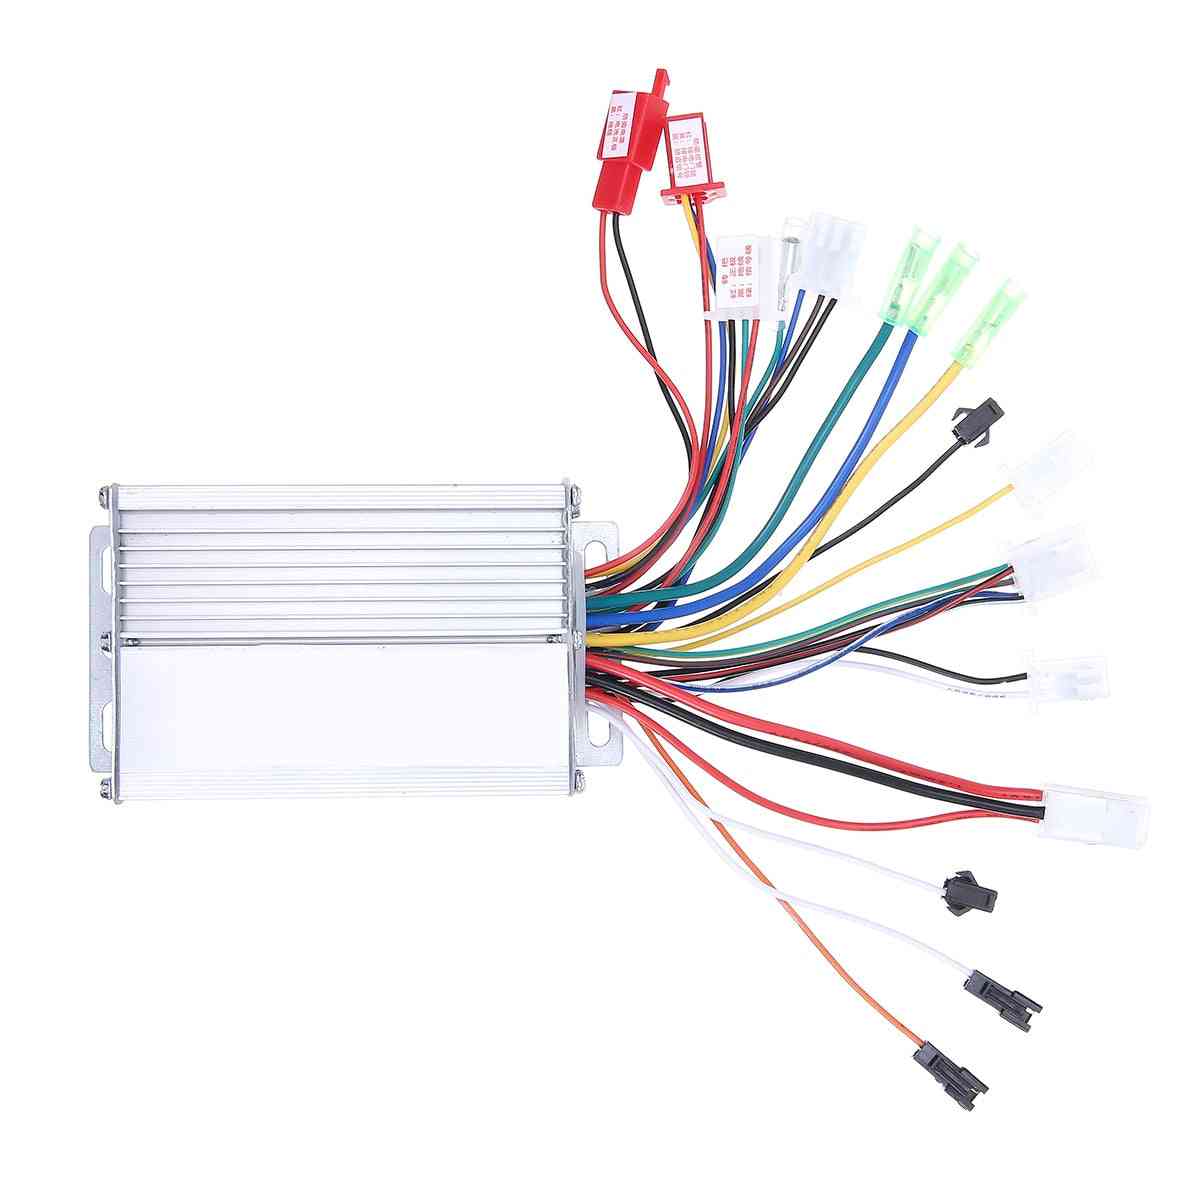 350w Brushless Dc Motor Regulator - Speed Controller For Electric Bicycle